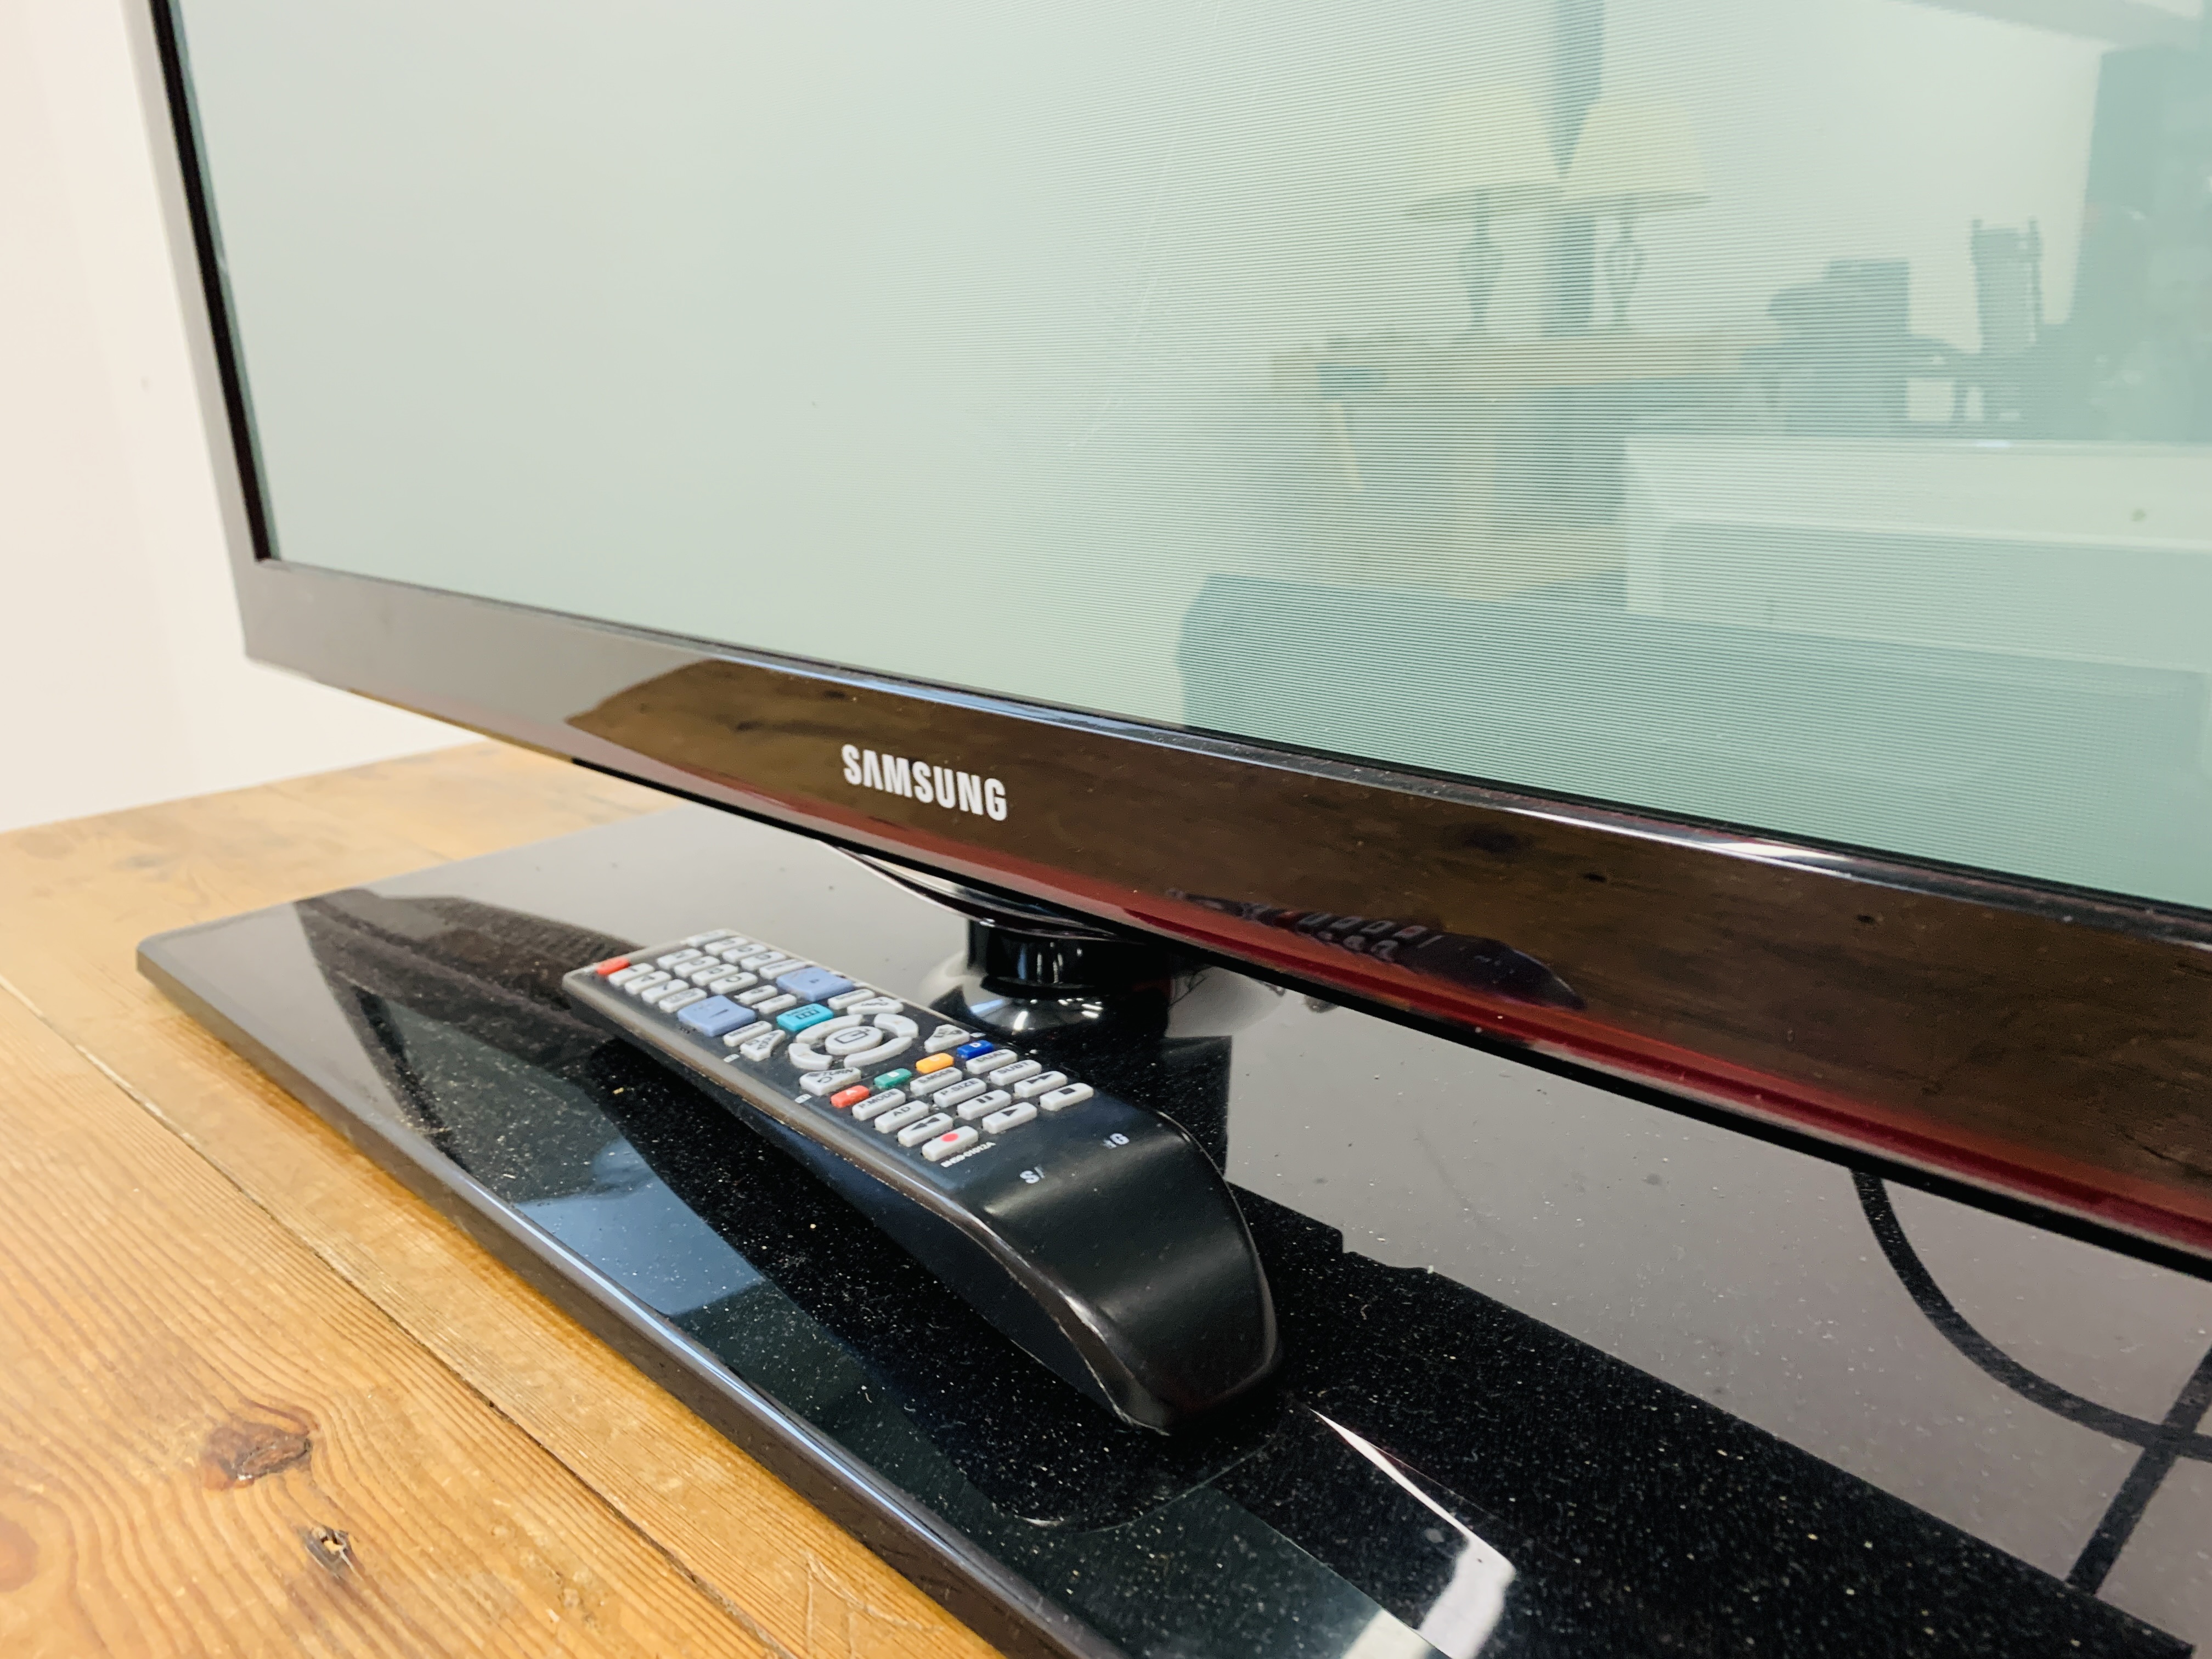 SAMSUNG 42 INCH TELEVISION WITH REMOTE - SOLD AS SEEN. - Image 3 of 4